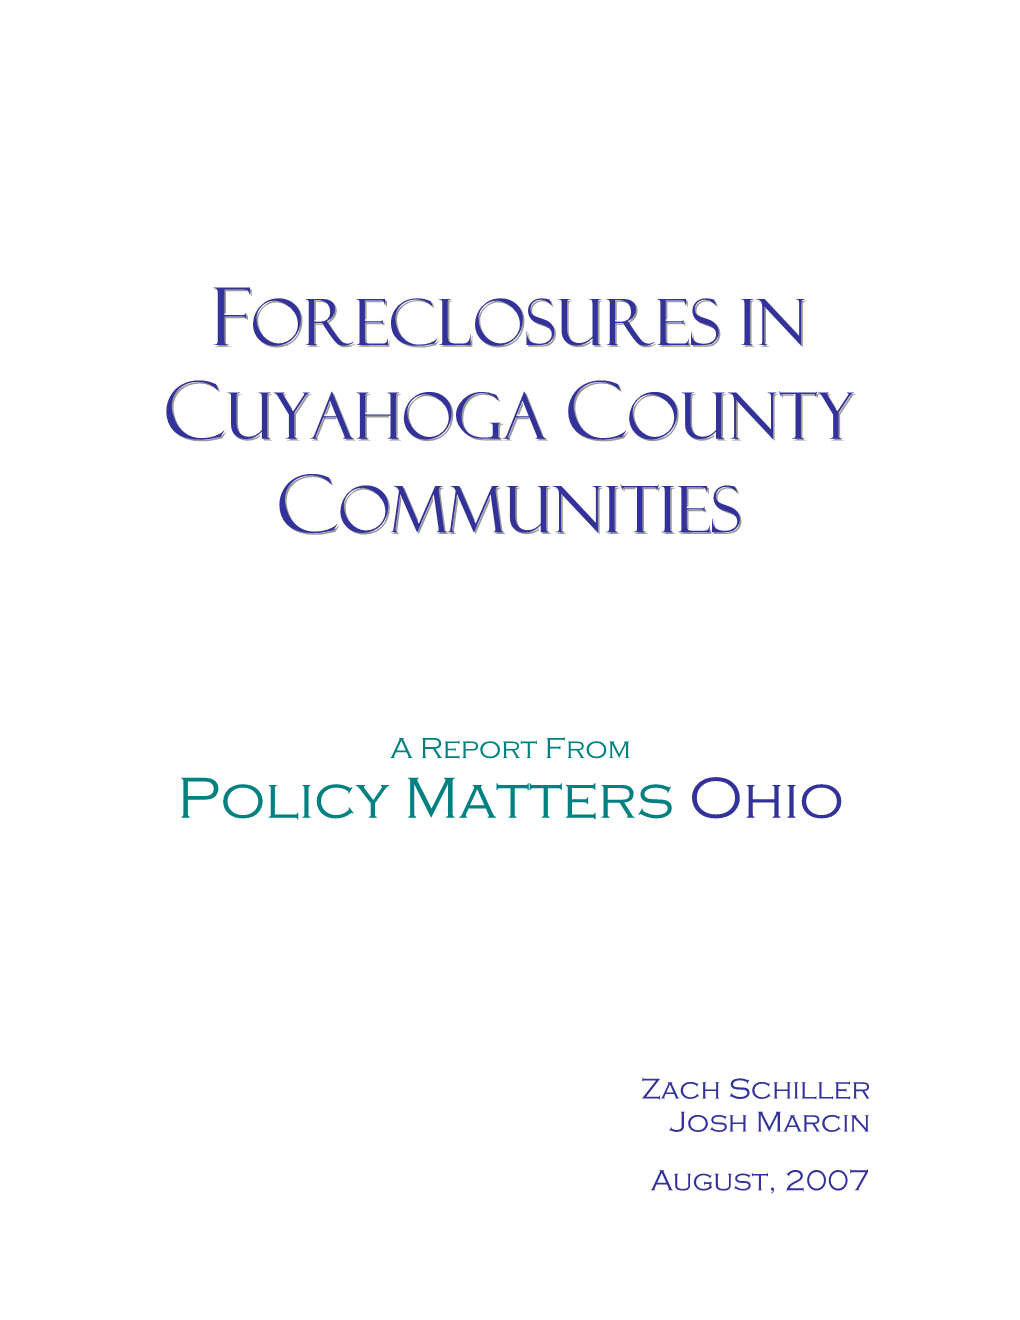 Foreclosures in Cuyahoga County Communities